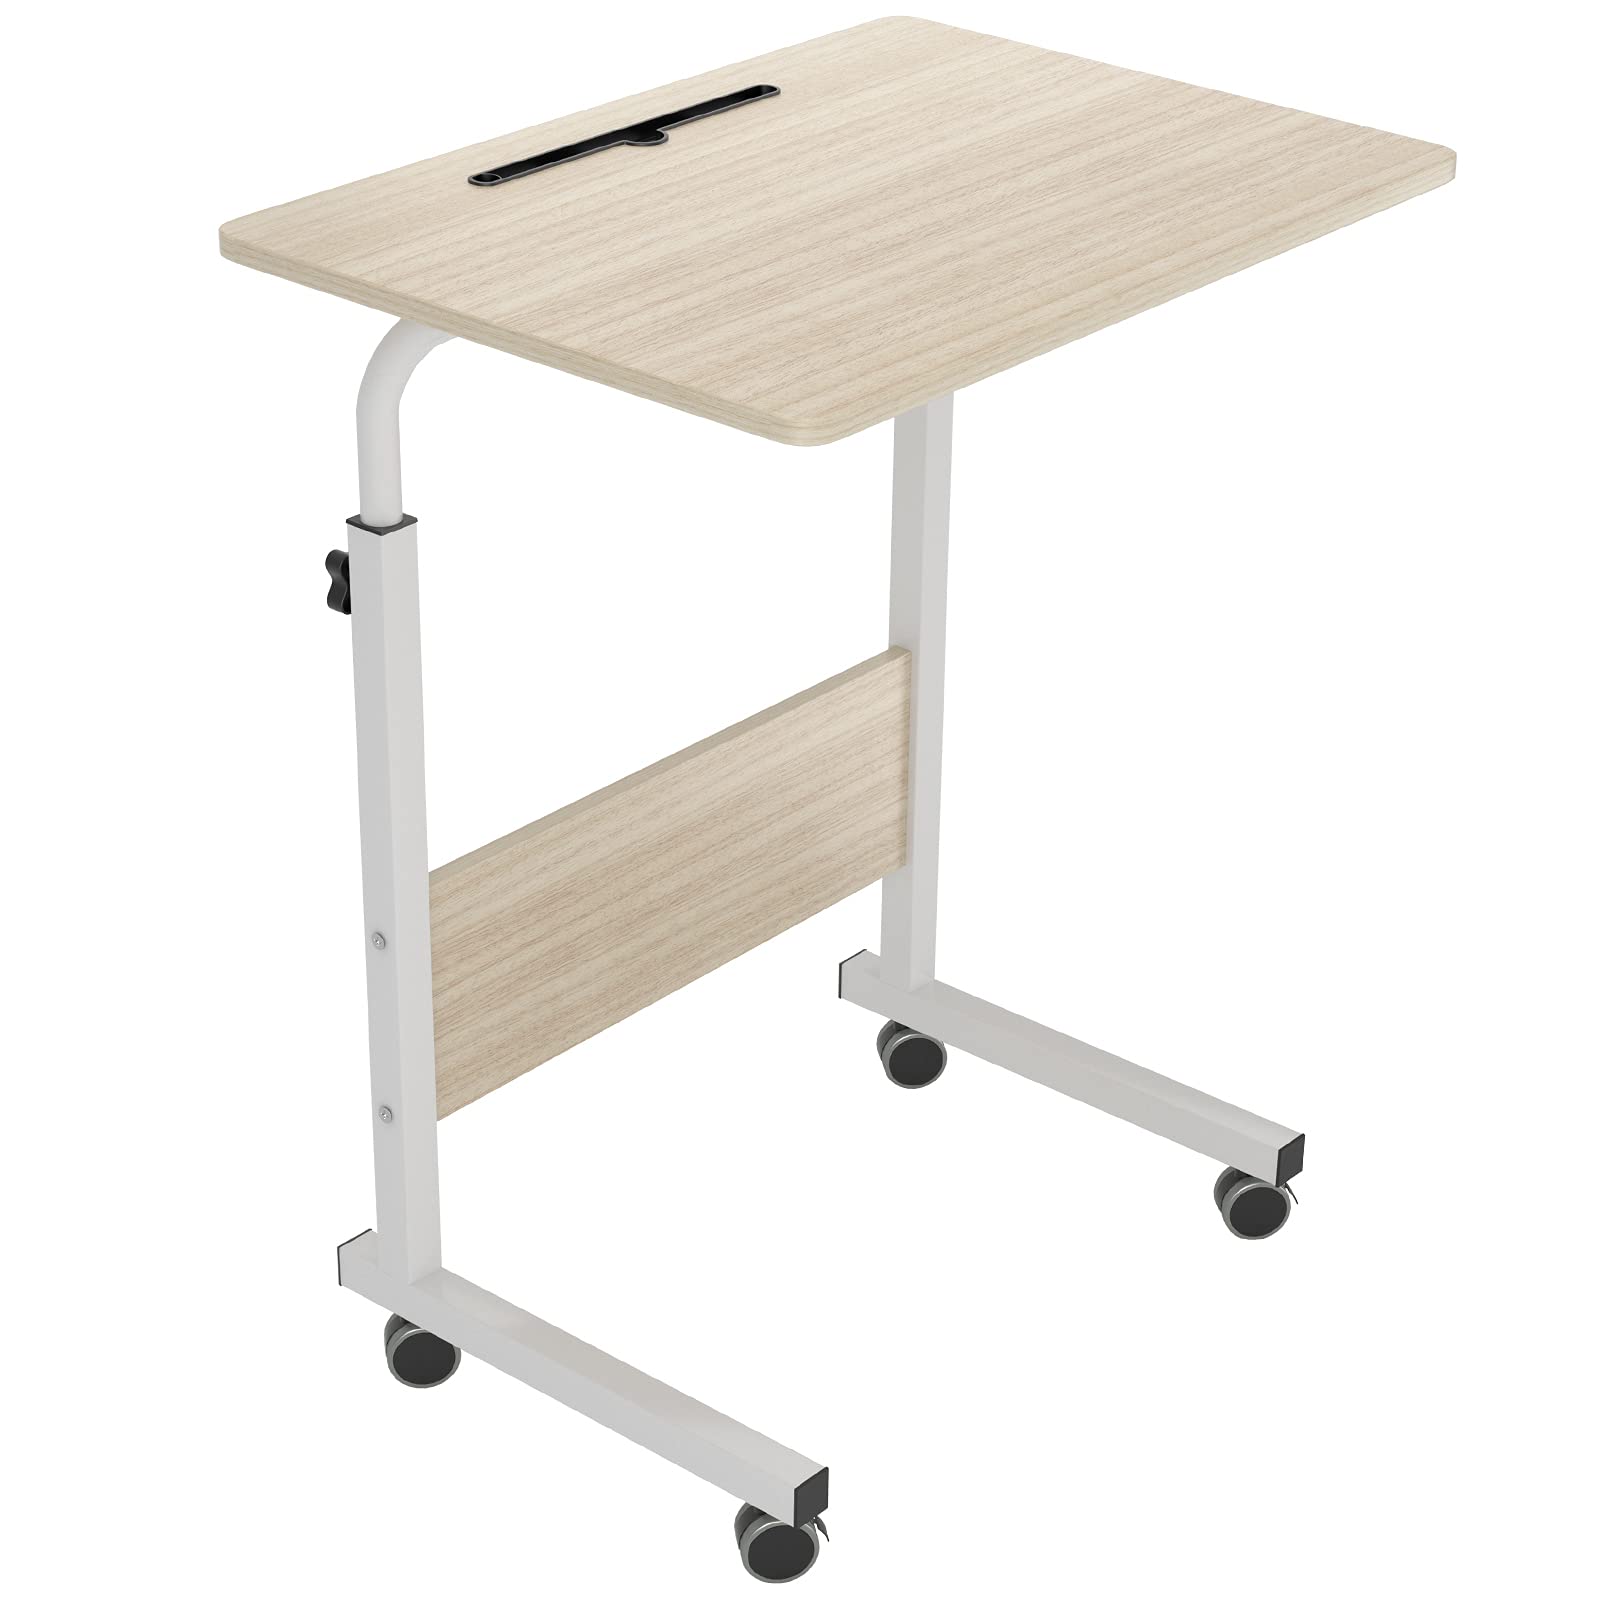 SogesHome 23.6 inch Adjustable Mobile Bed Table Portable Laptop Computer Stand Desks with Tablet Slot Cart Tray, Maple White